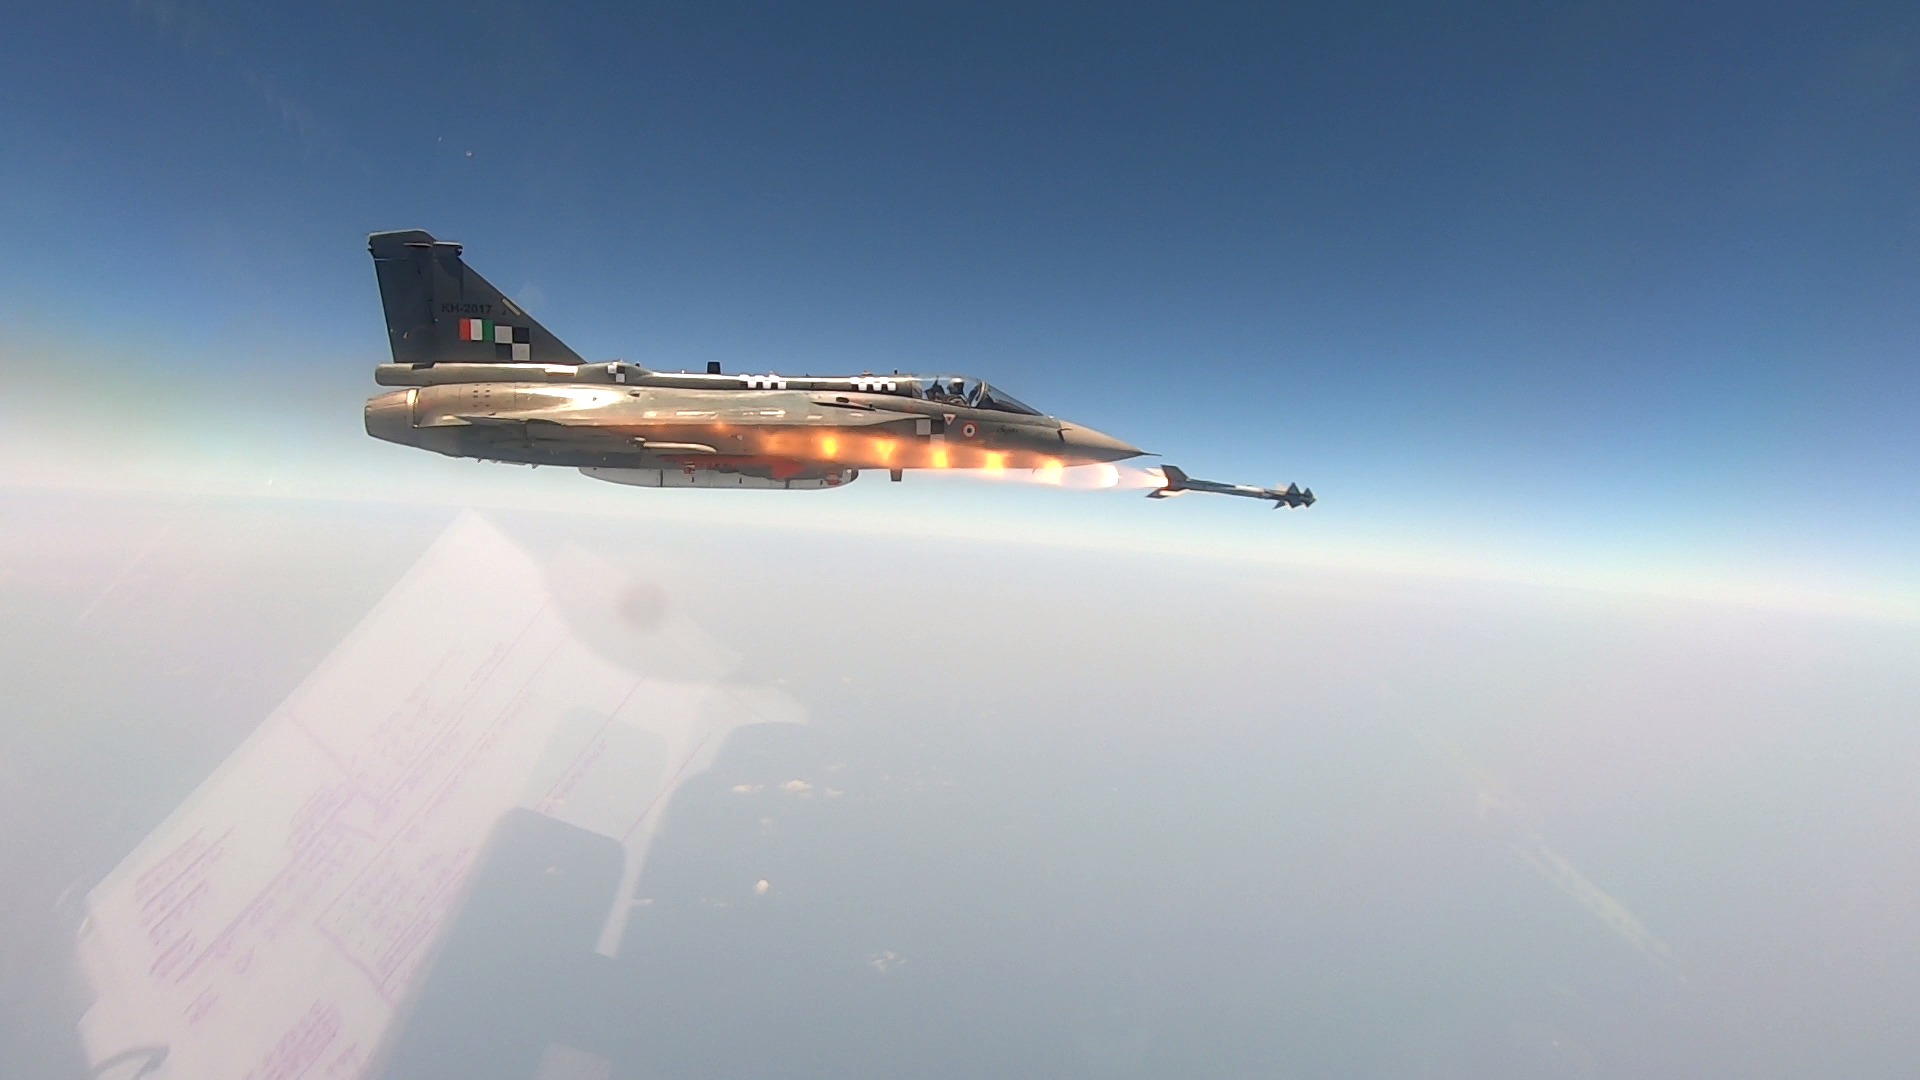 Tejas adds Python 5 missile to its weapon capability